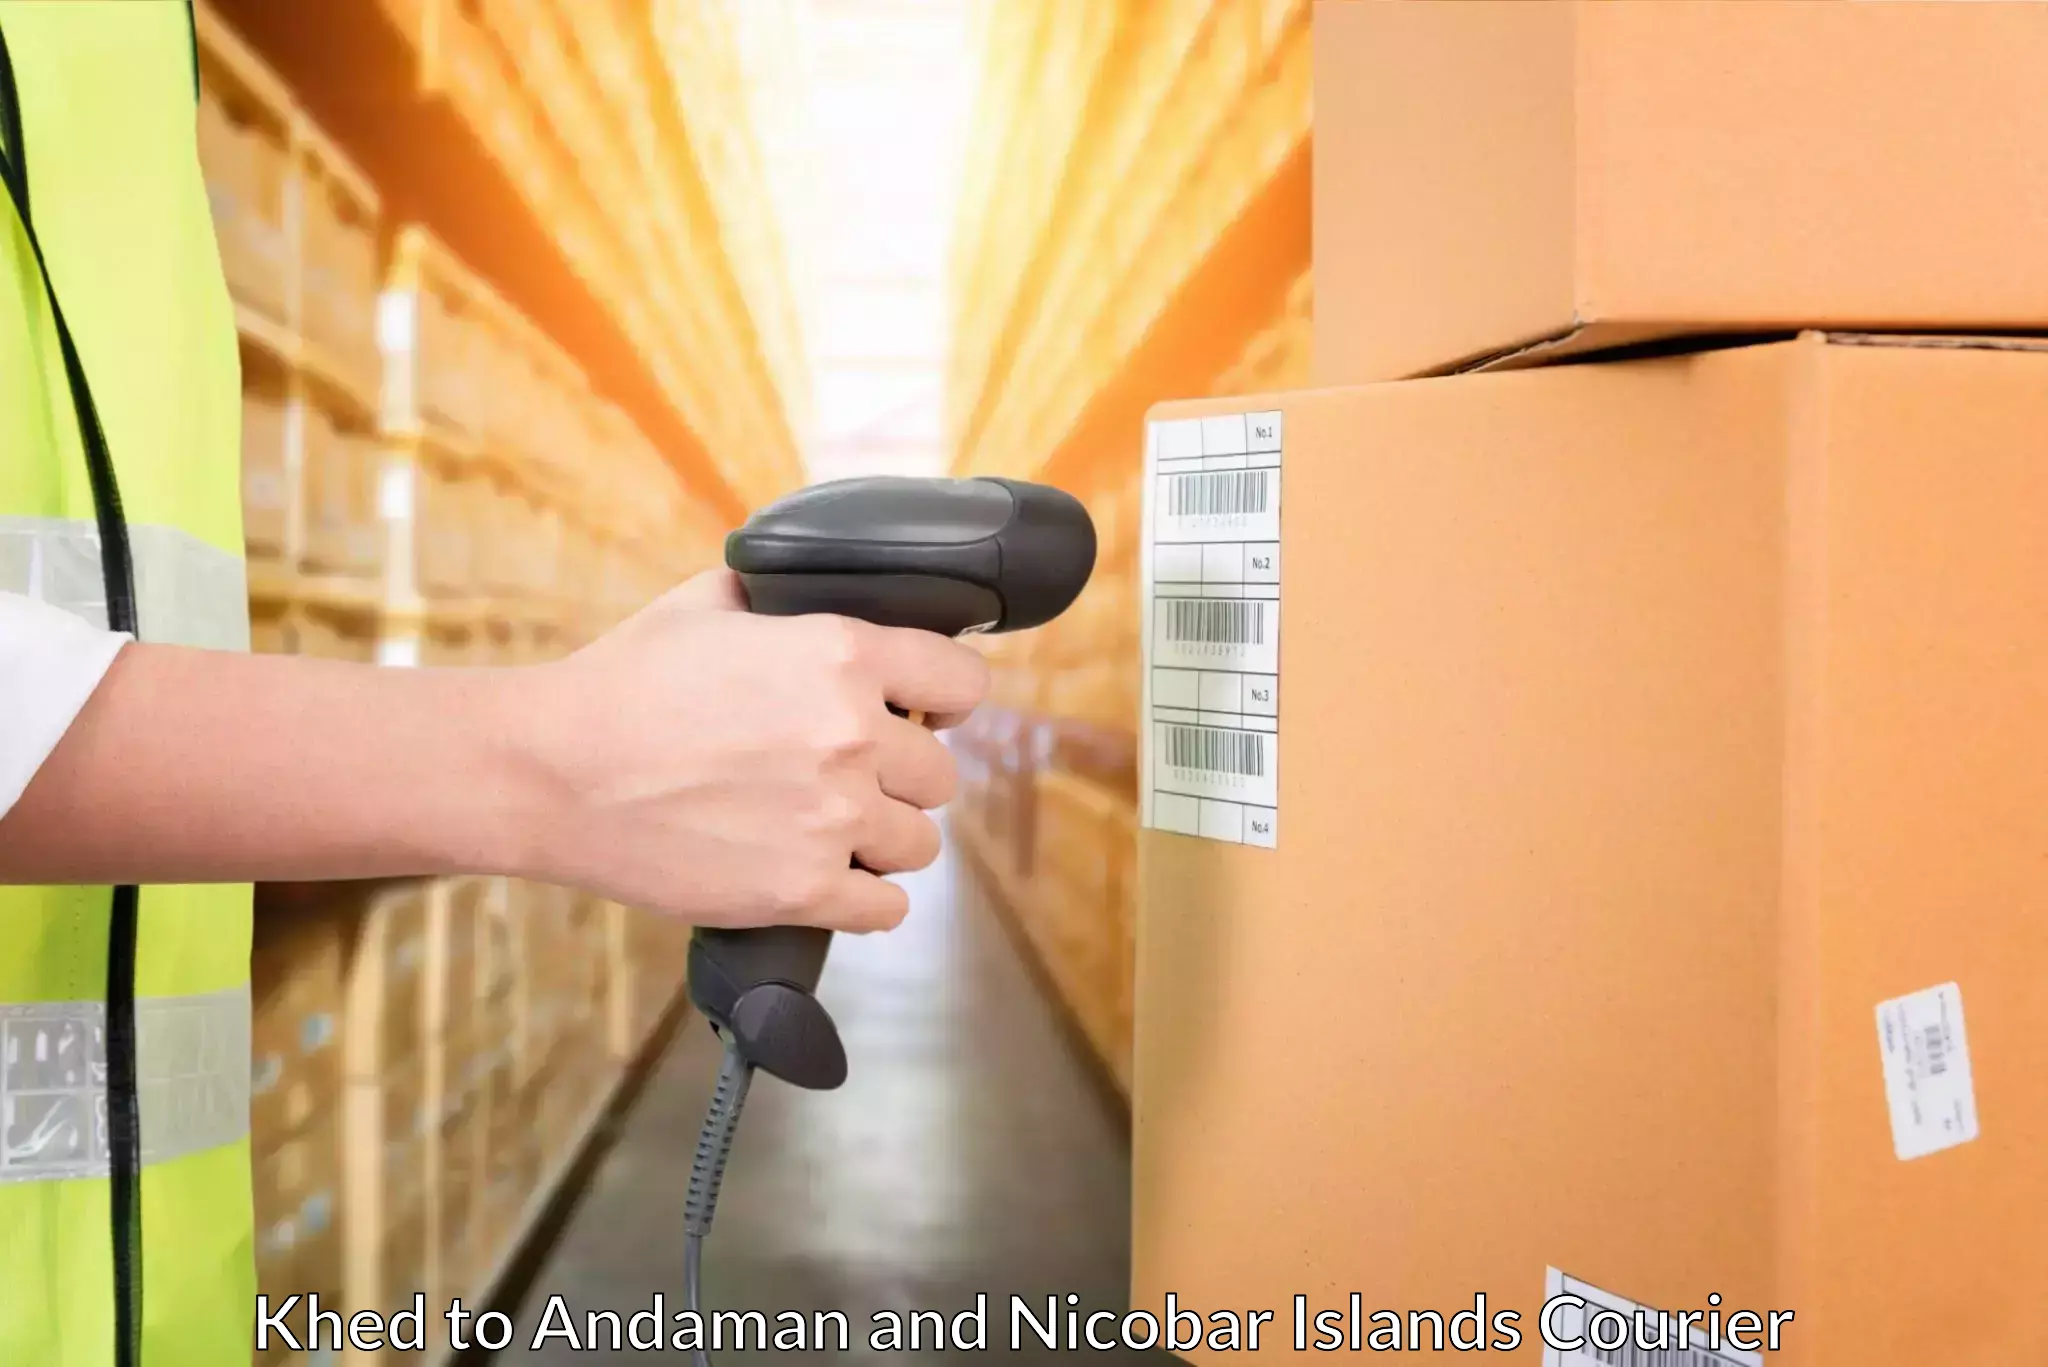 High-performance logistics in Khed to Andaman and Nicobar Islands